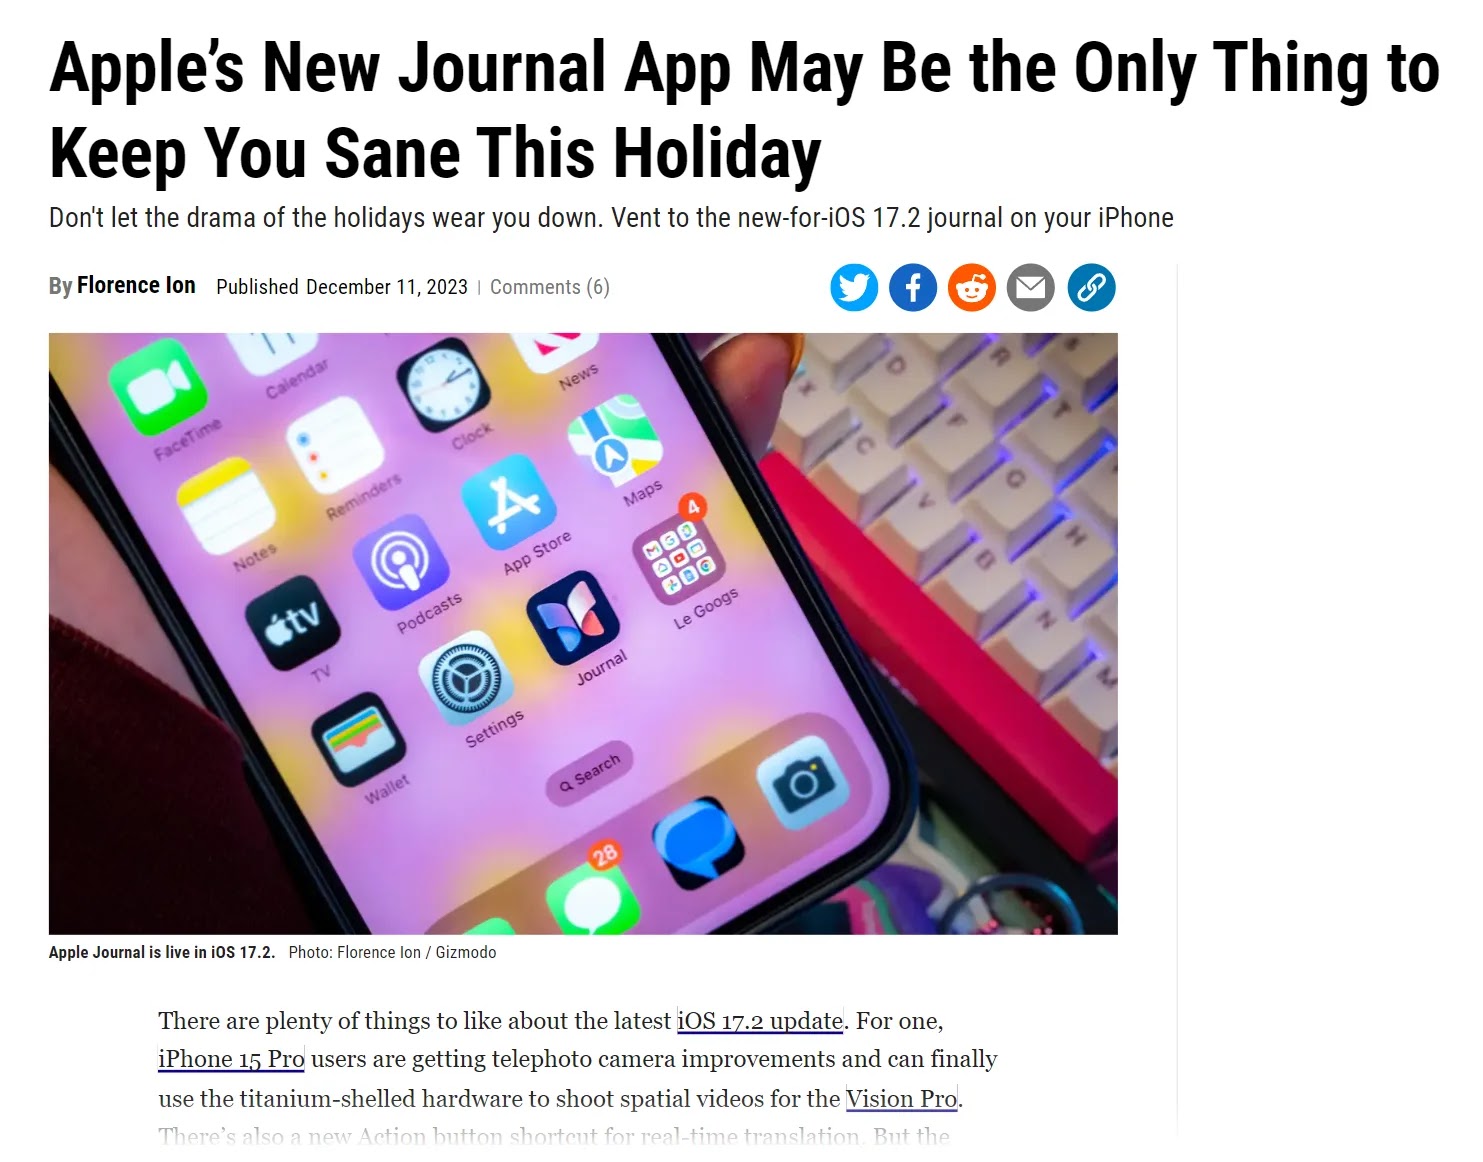 Gizmodo's article titled: "Apple's new journal app may be the only thing to keep you sane this holiday"